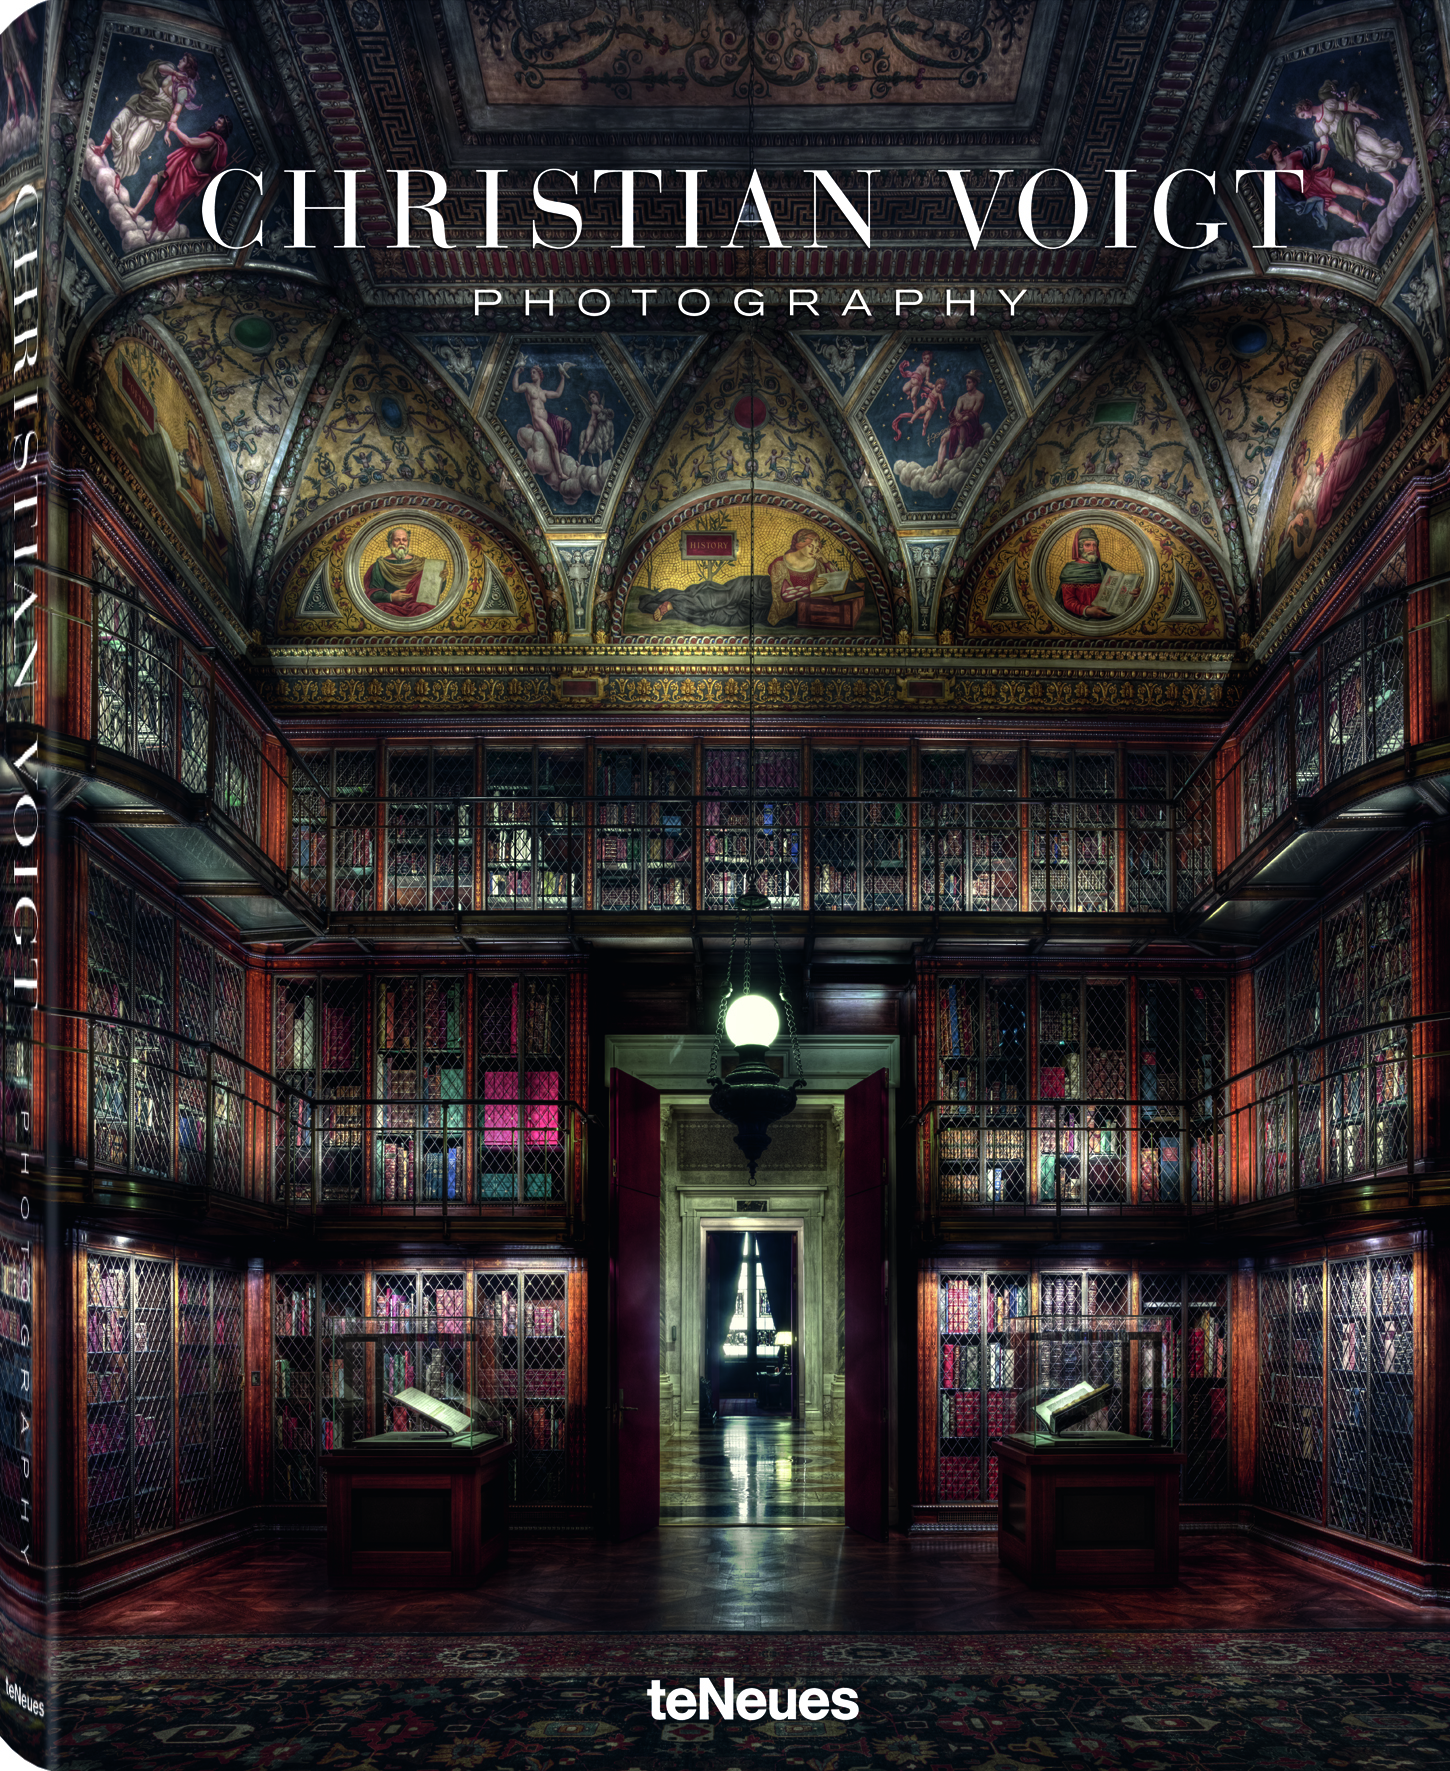 Christian Voigt's works are known internationally and have been exhibited across different countries.